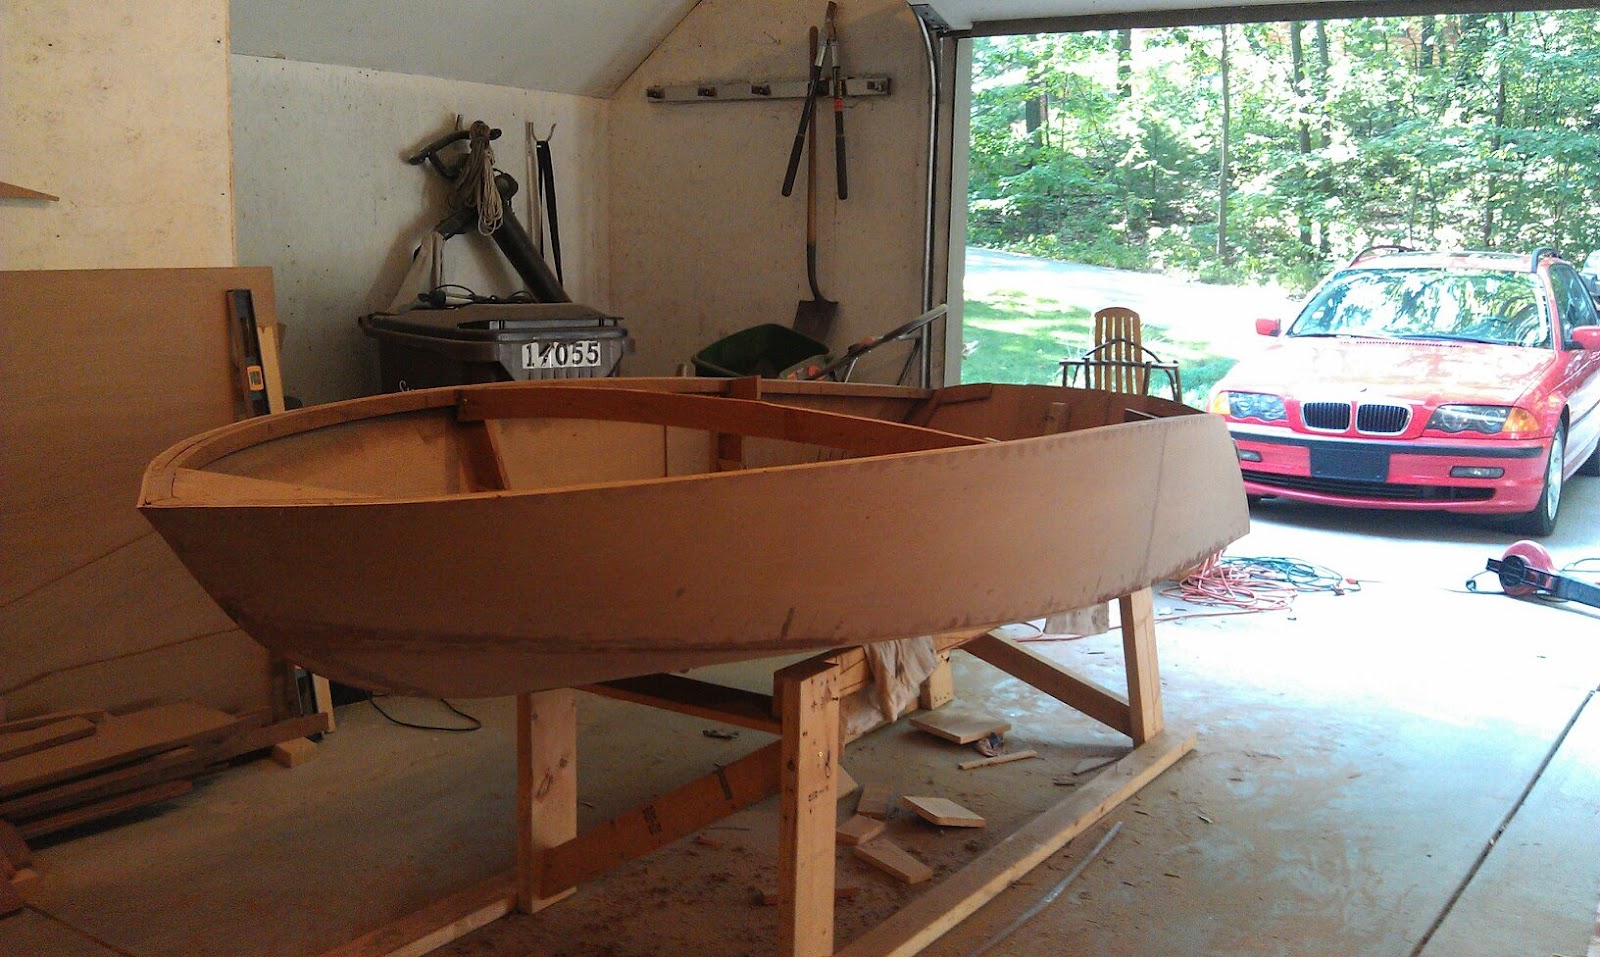 Jay: Fiberglass Boat Building Books How to Building Plans